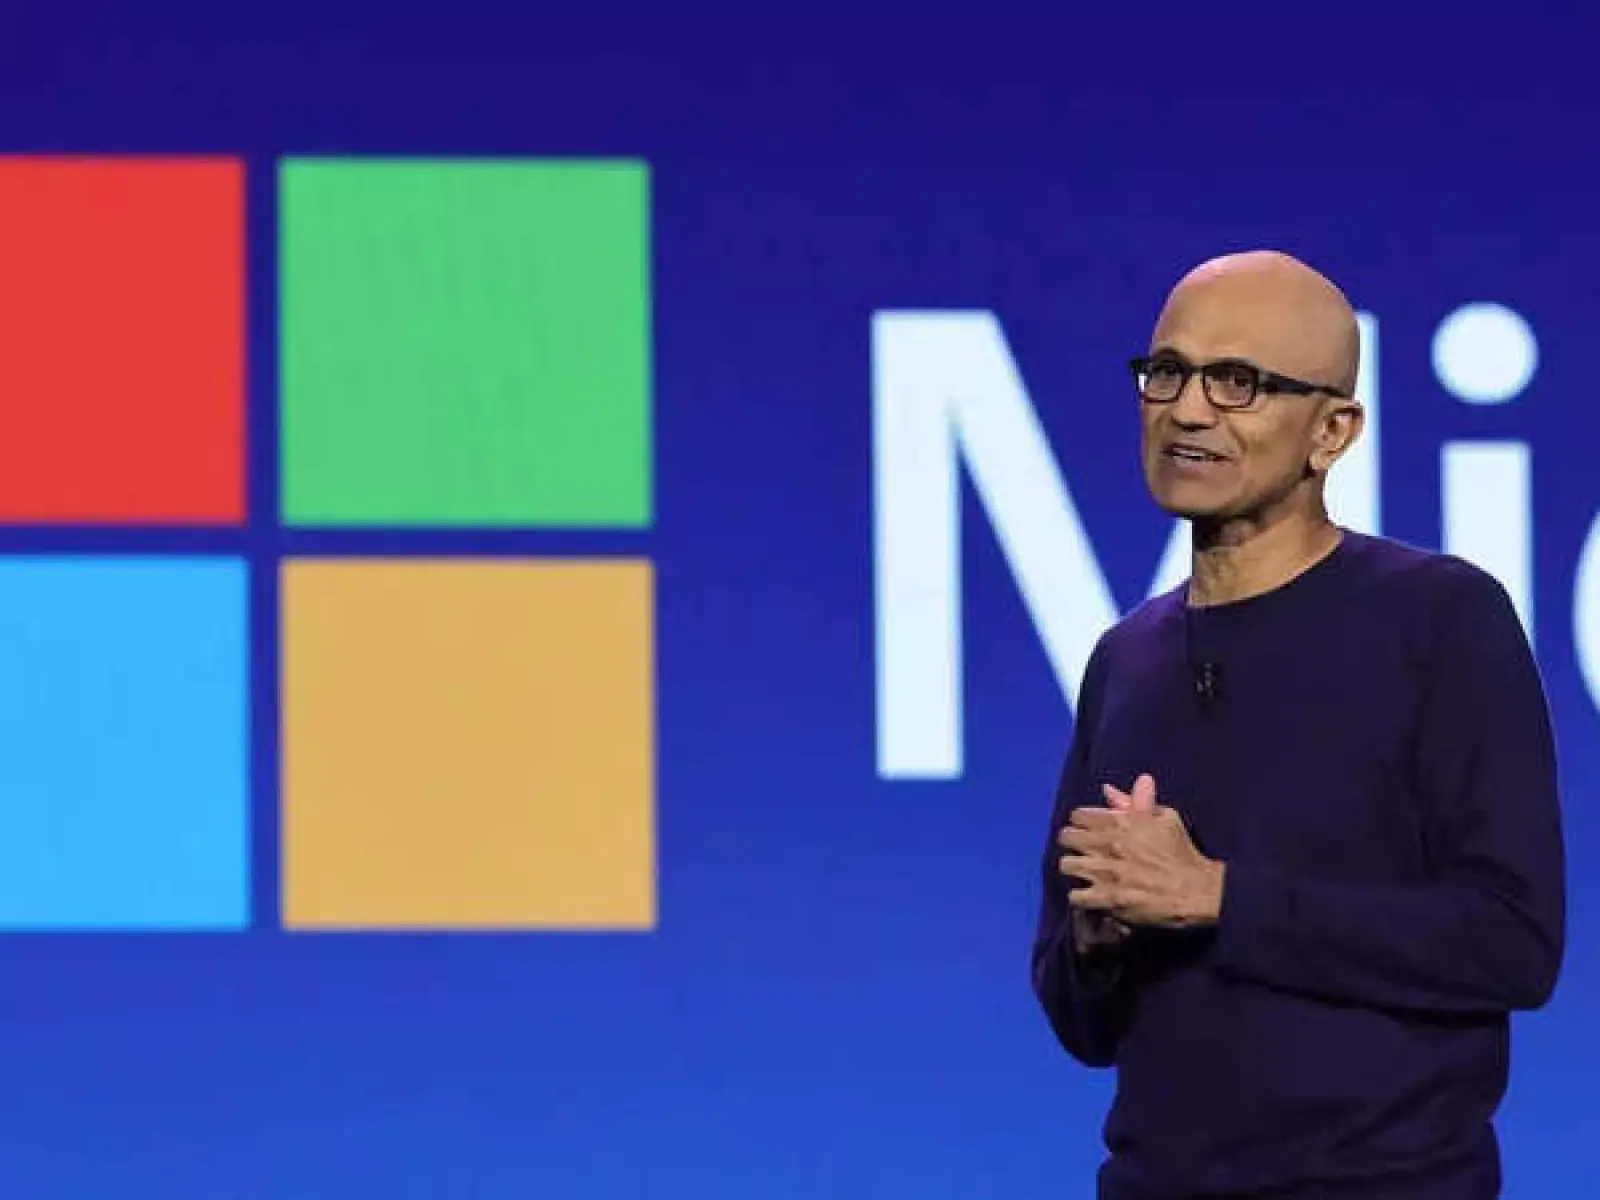 'The environment and development close to developers in India is incredible', said Microsoft CEO Satya Nadella